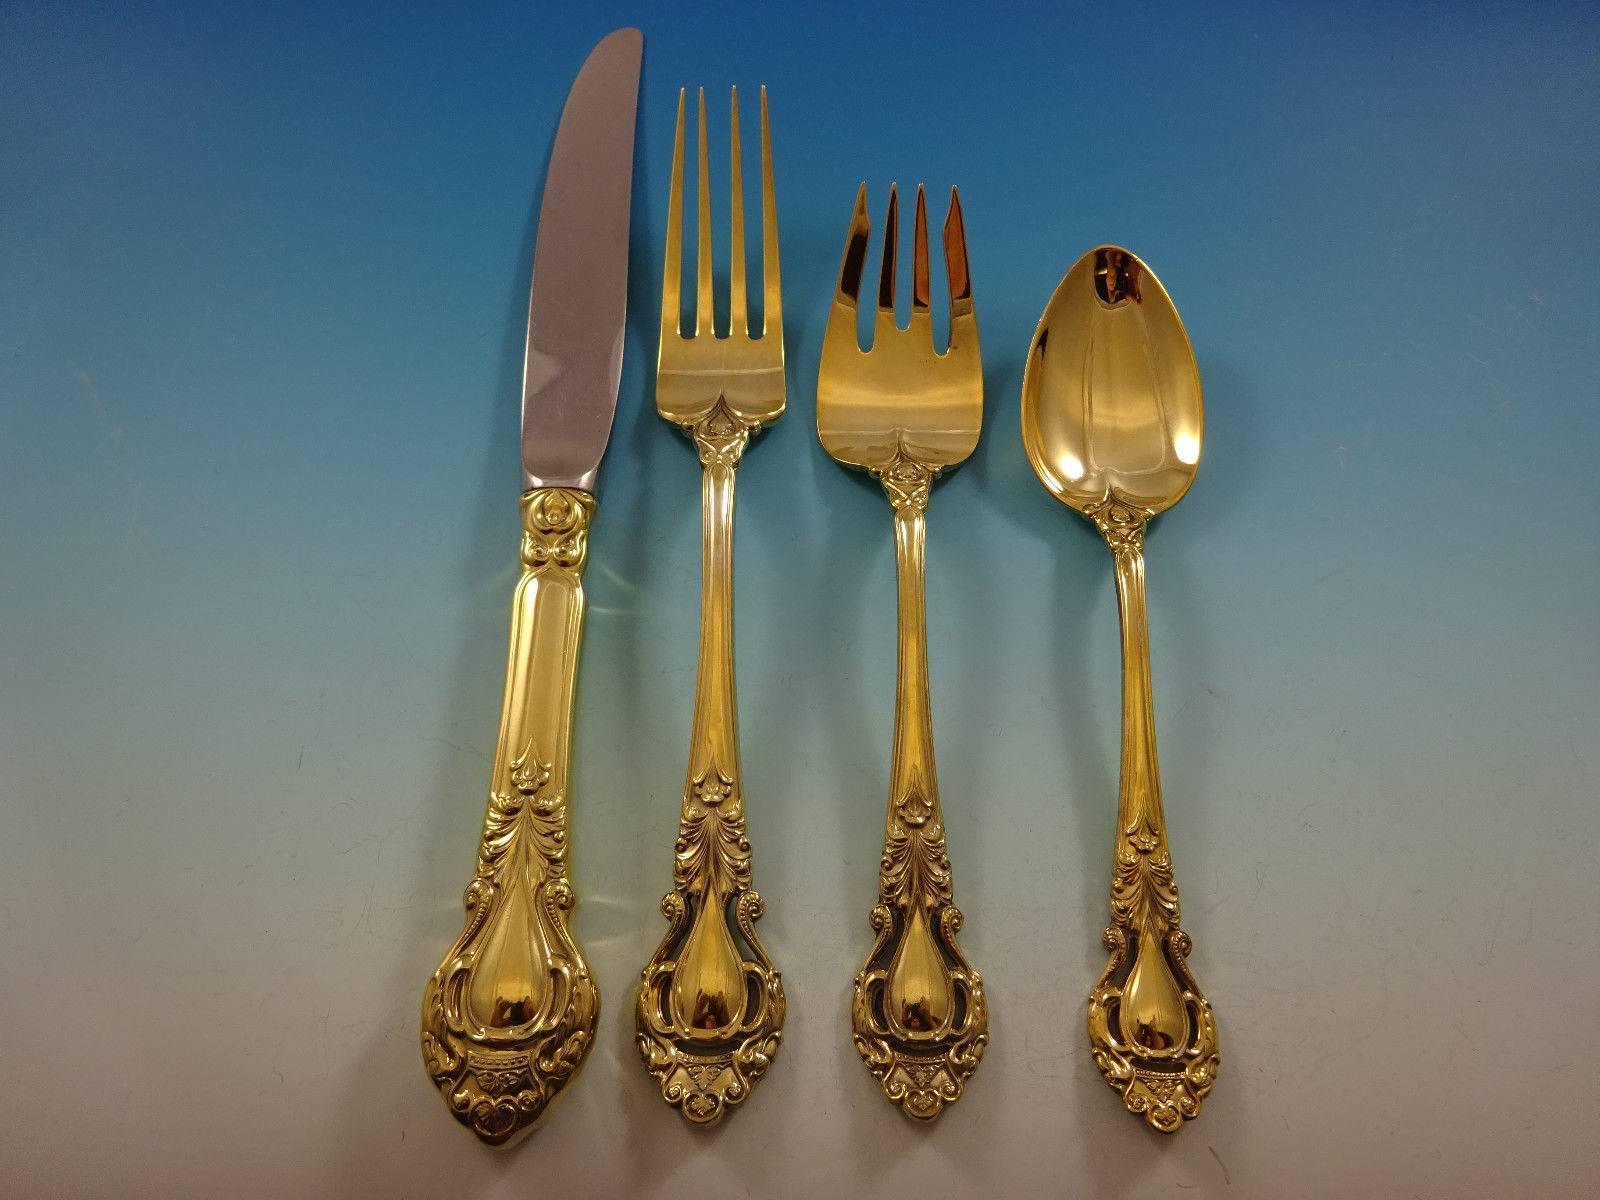 Gorgeous Royal Dynasty Gold by Kirk Stieff sterling silver flatware set of 48 pieces. Gold flatware is on trend and makes a bold statement on your table. 

This set is vermeil (completely gold-washed) and includes:
 
12 knives, 9 1/4